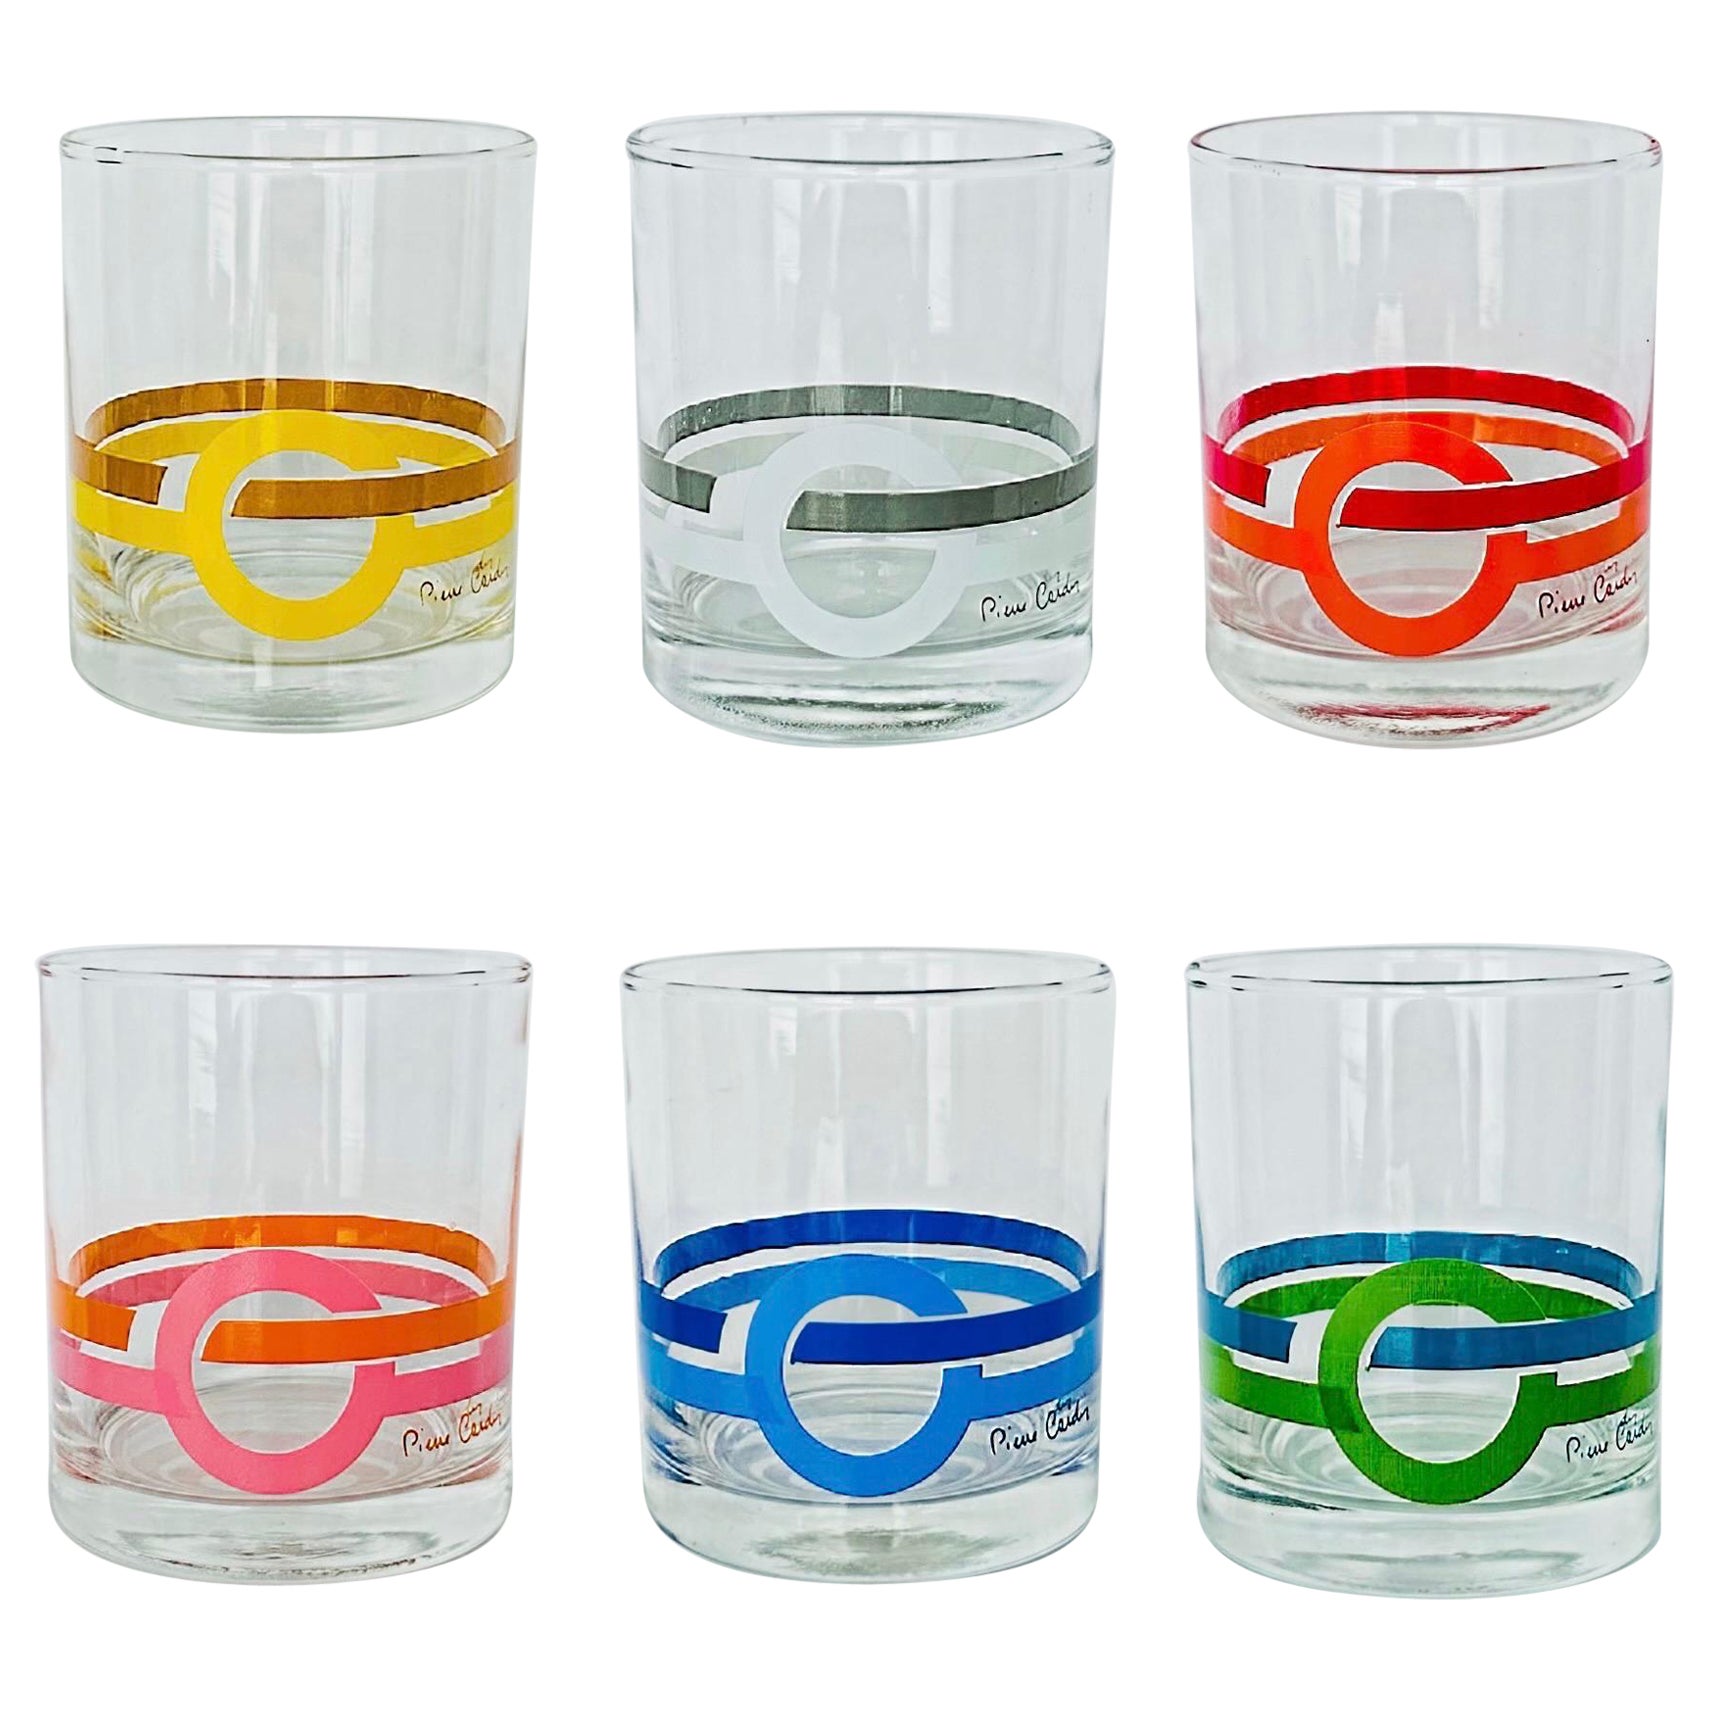 1970s Pierre Carin Space Age Tumbler Glasses – Set of 6